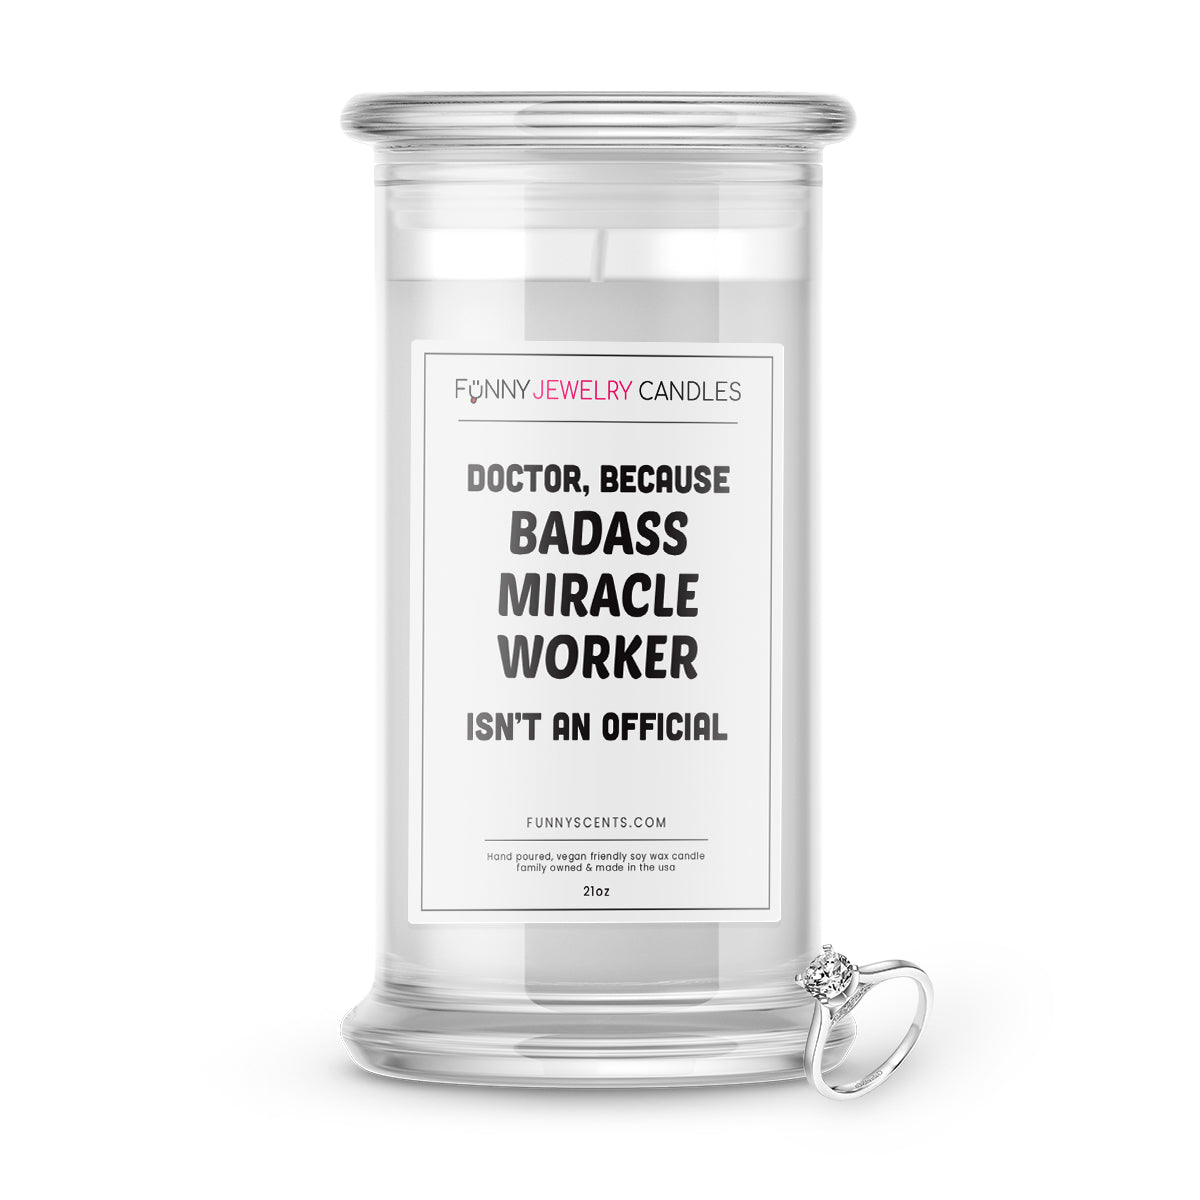 Doctor, Because Badass Miracle Worker isn't an Official Job Title Jewelry Funny Candles